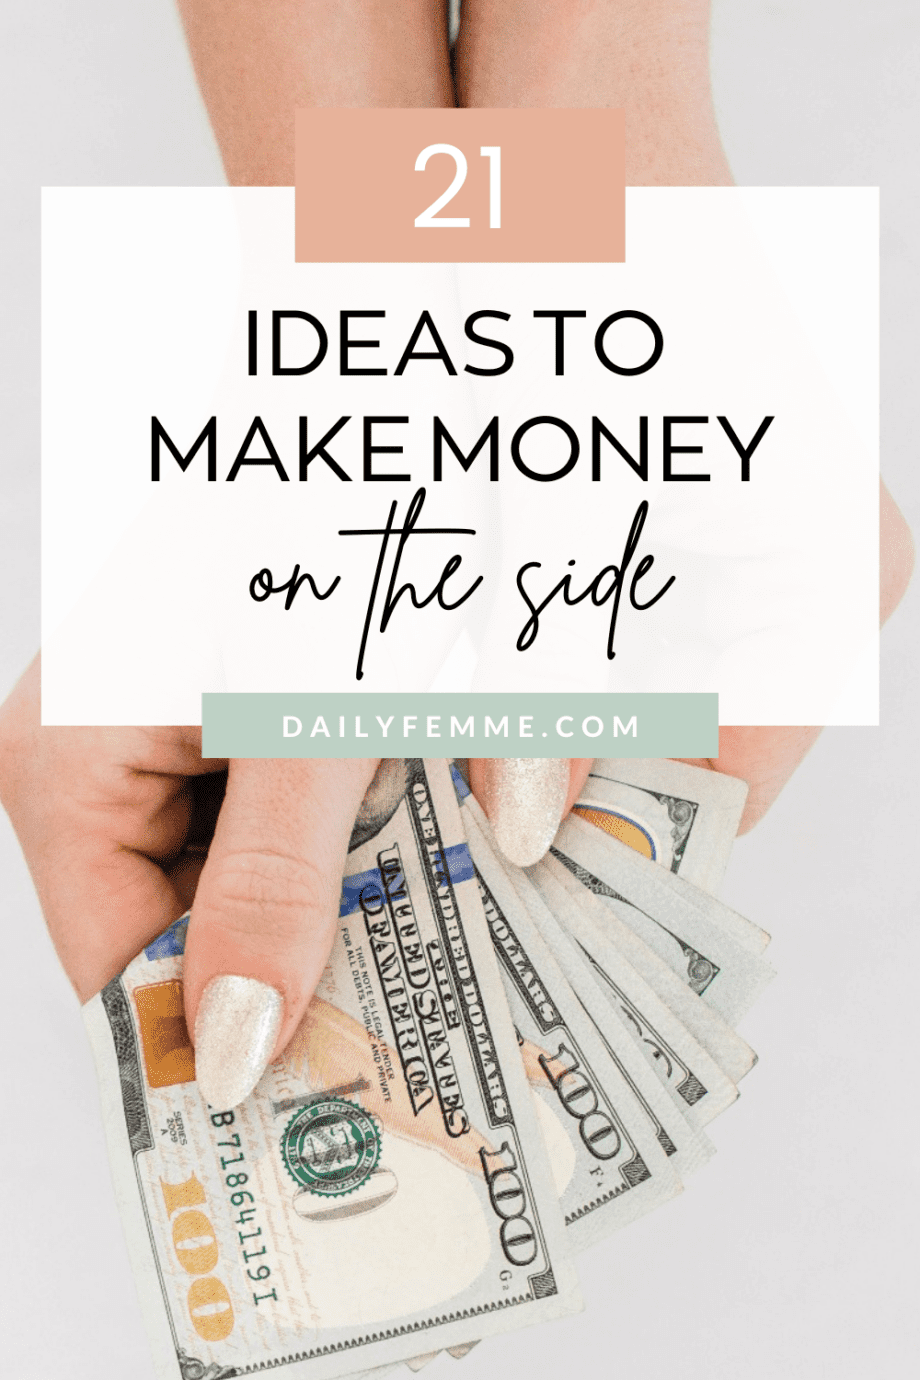 Nowadays, making extra money is easier than ever. Here are 21 ideas to make money on the side!